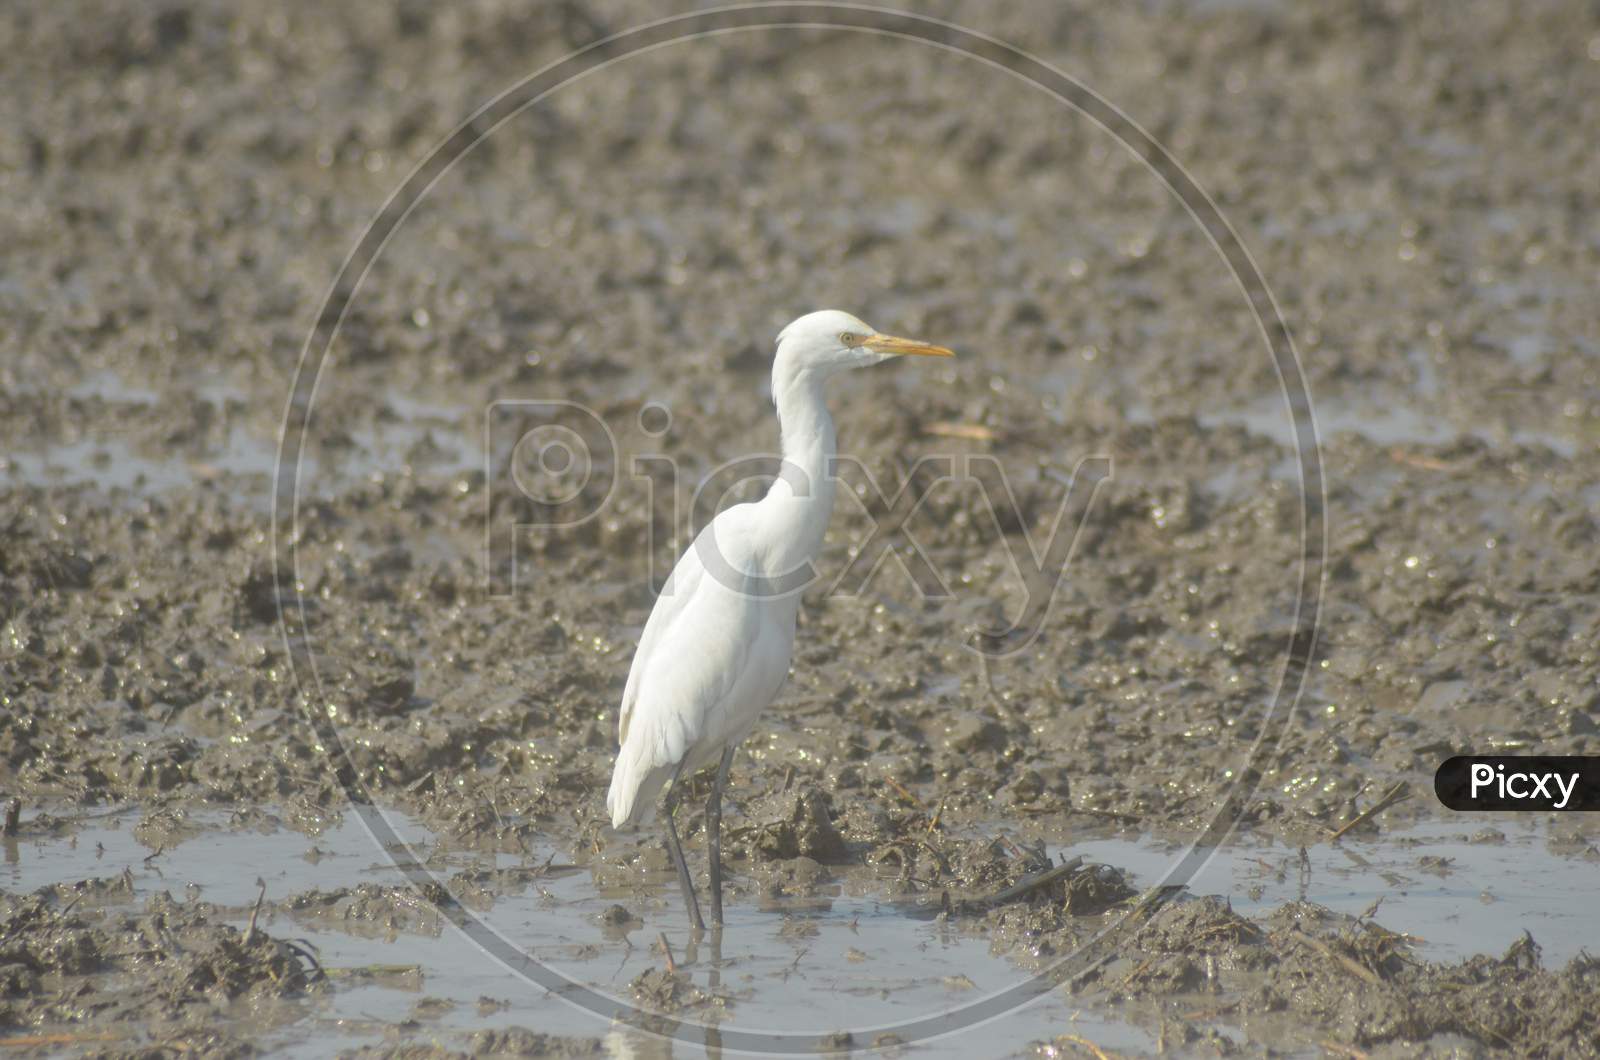 Group of Egret Birds in a Paddy Field, Nagaon, Assam